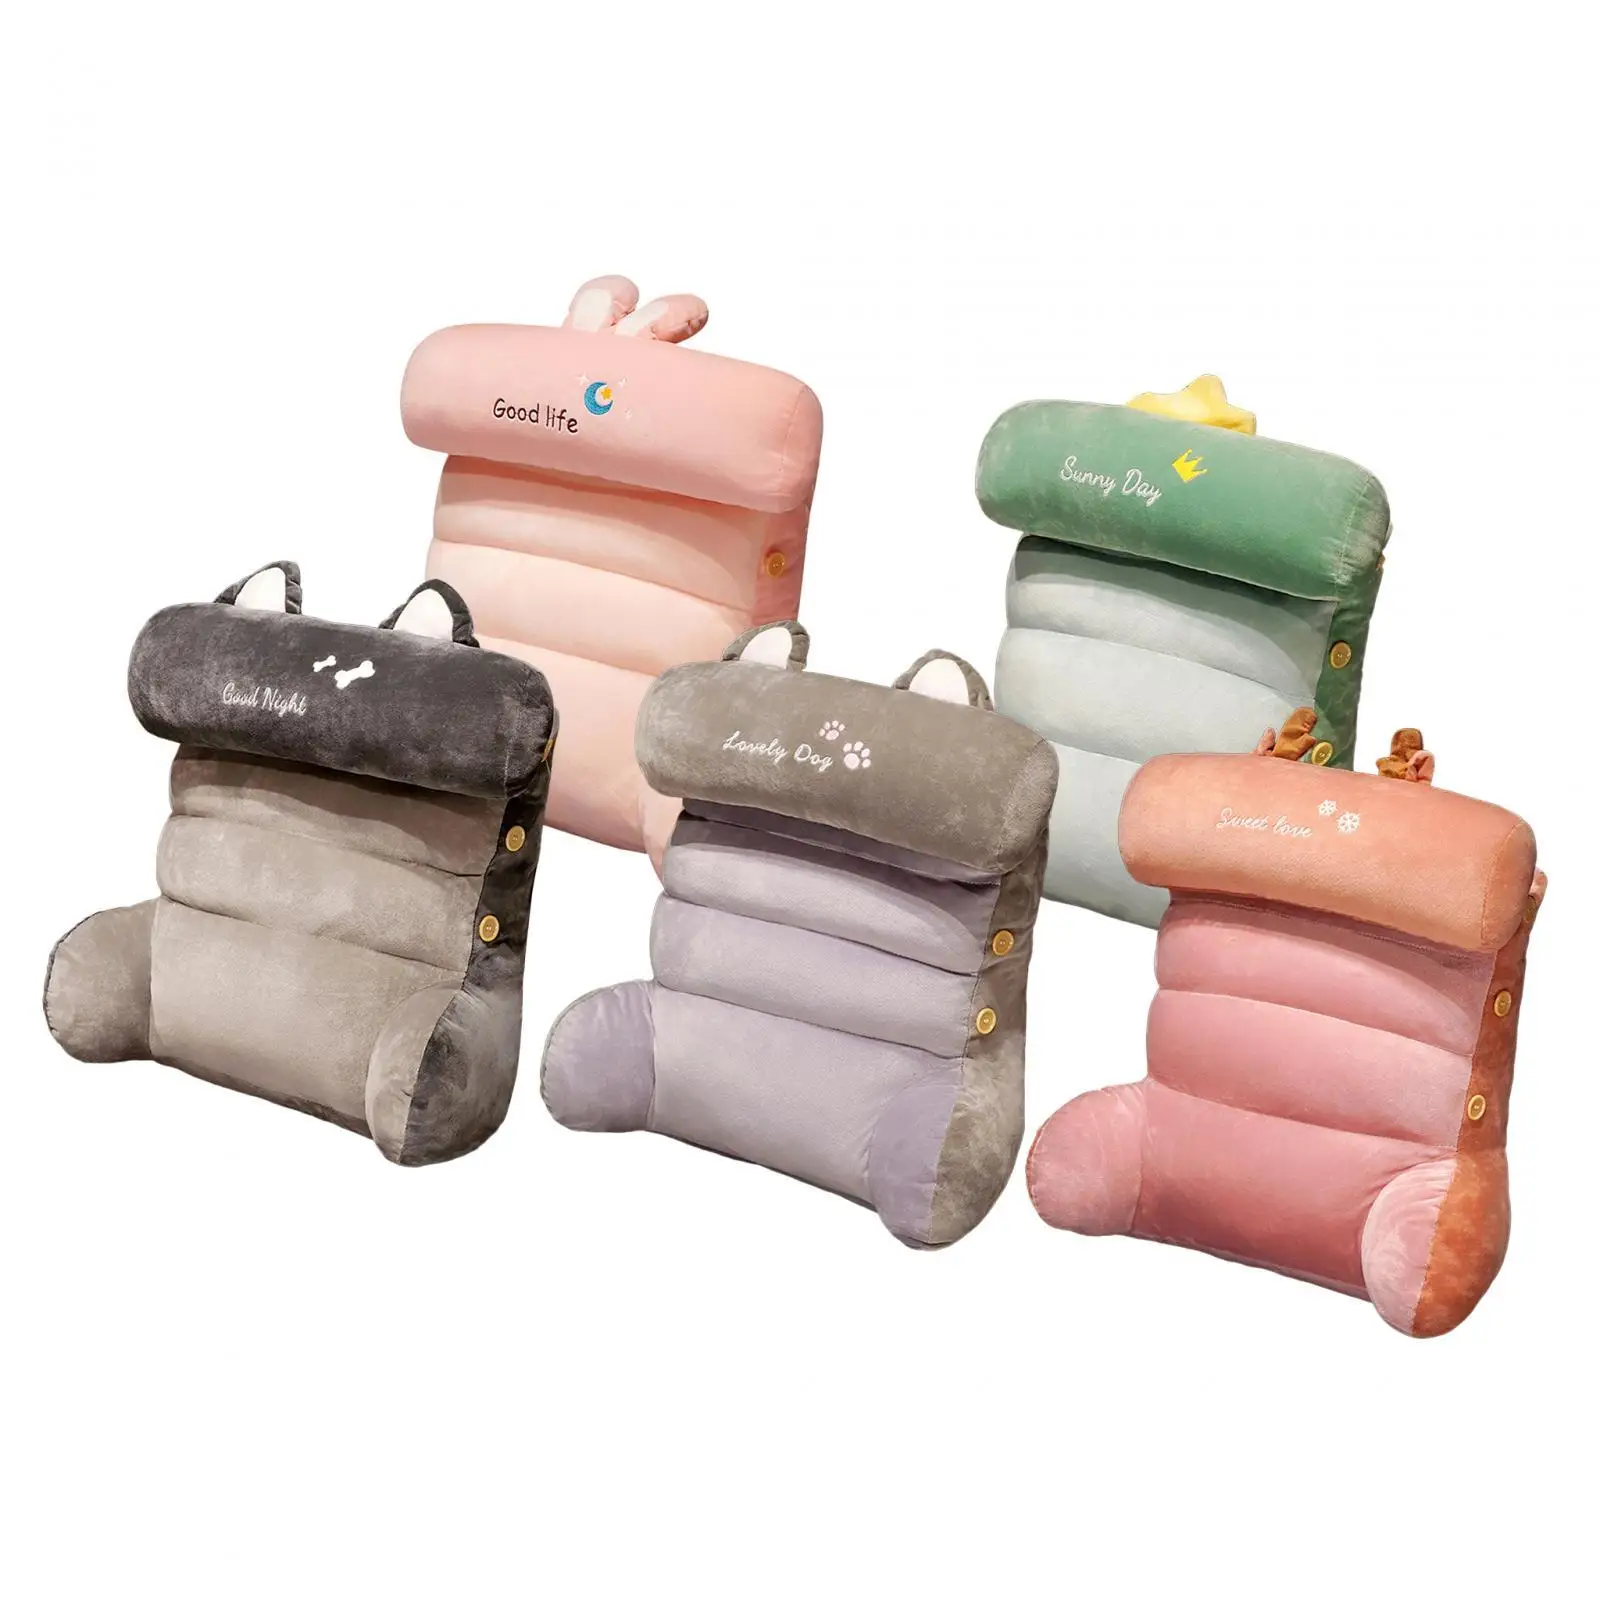 Plush Backrest Pillow waist Support Cushion with Arms and Pockets Chair Cushion for Computer Chair Bedroom Sofa